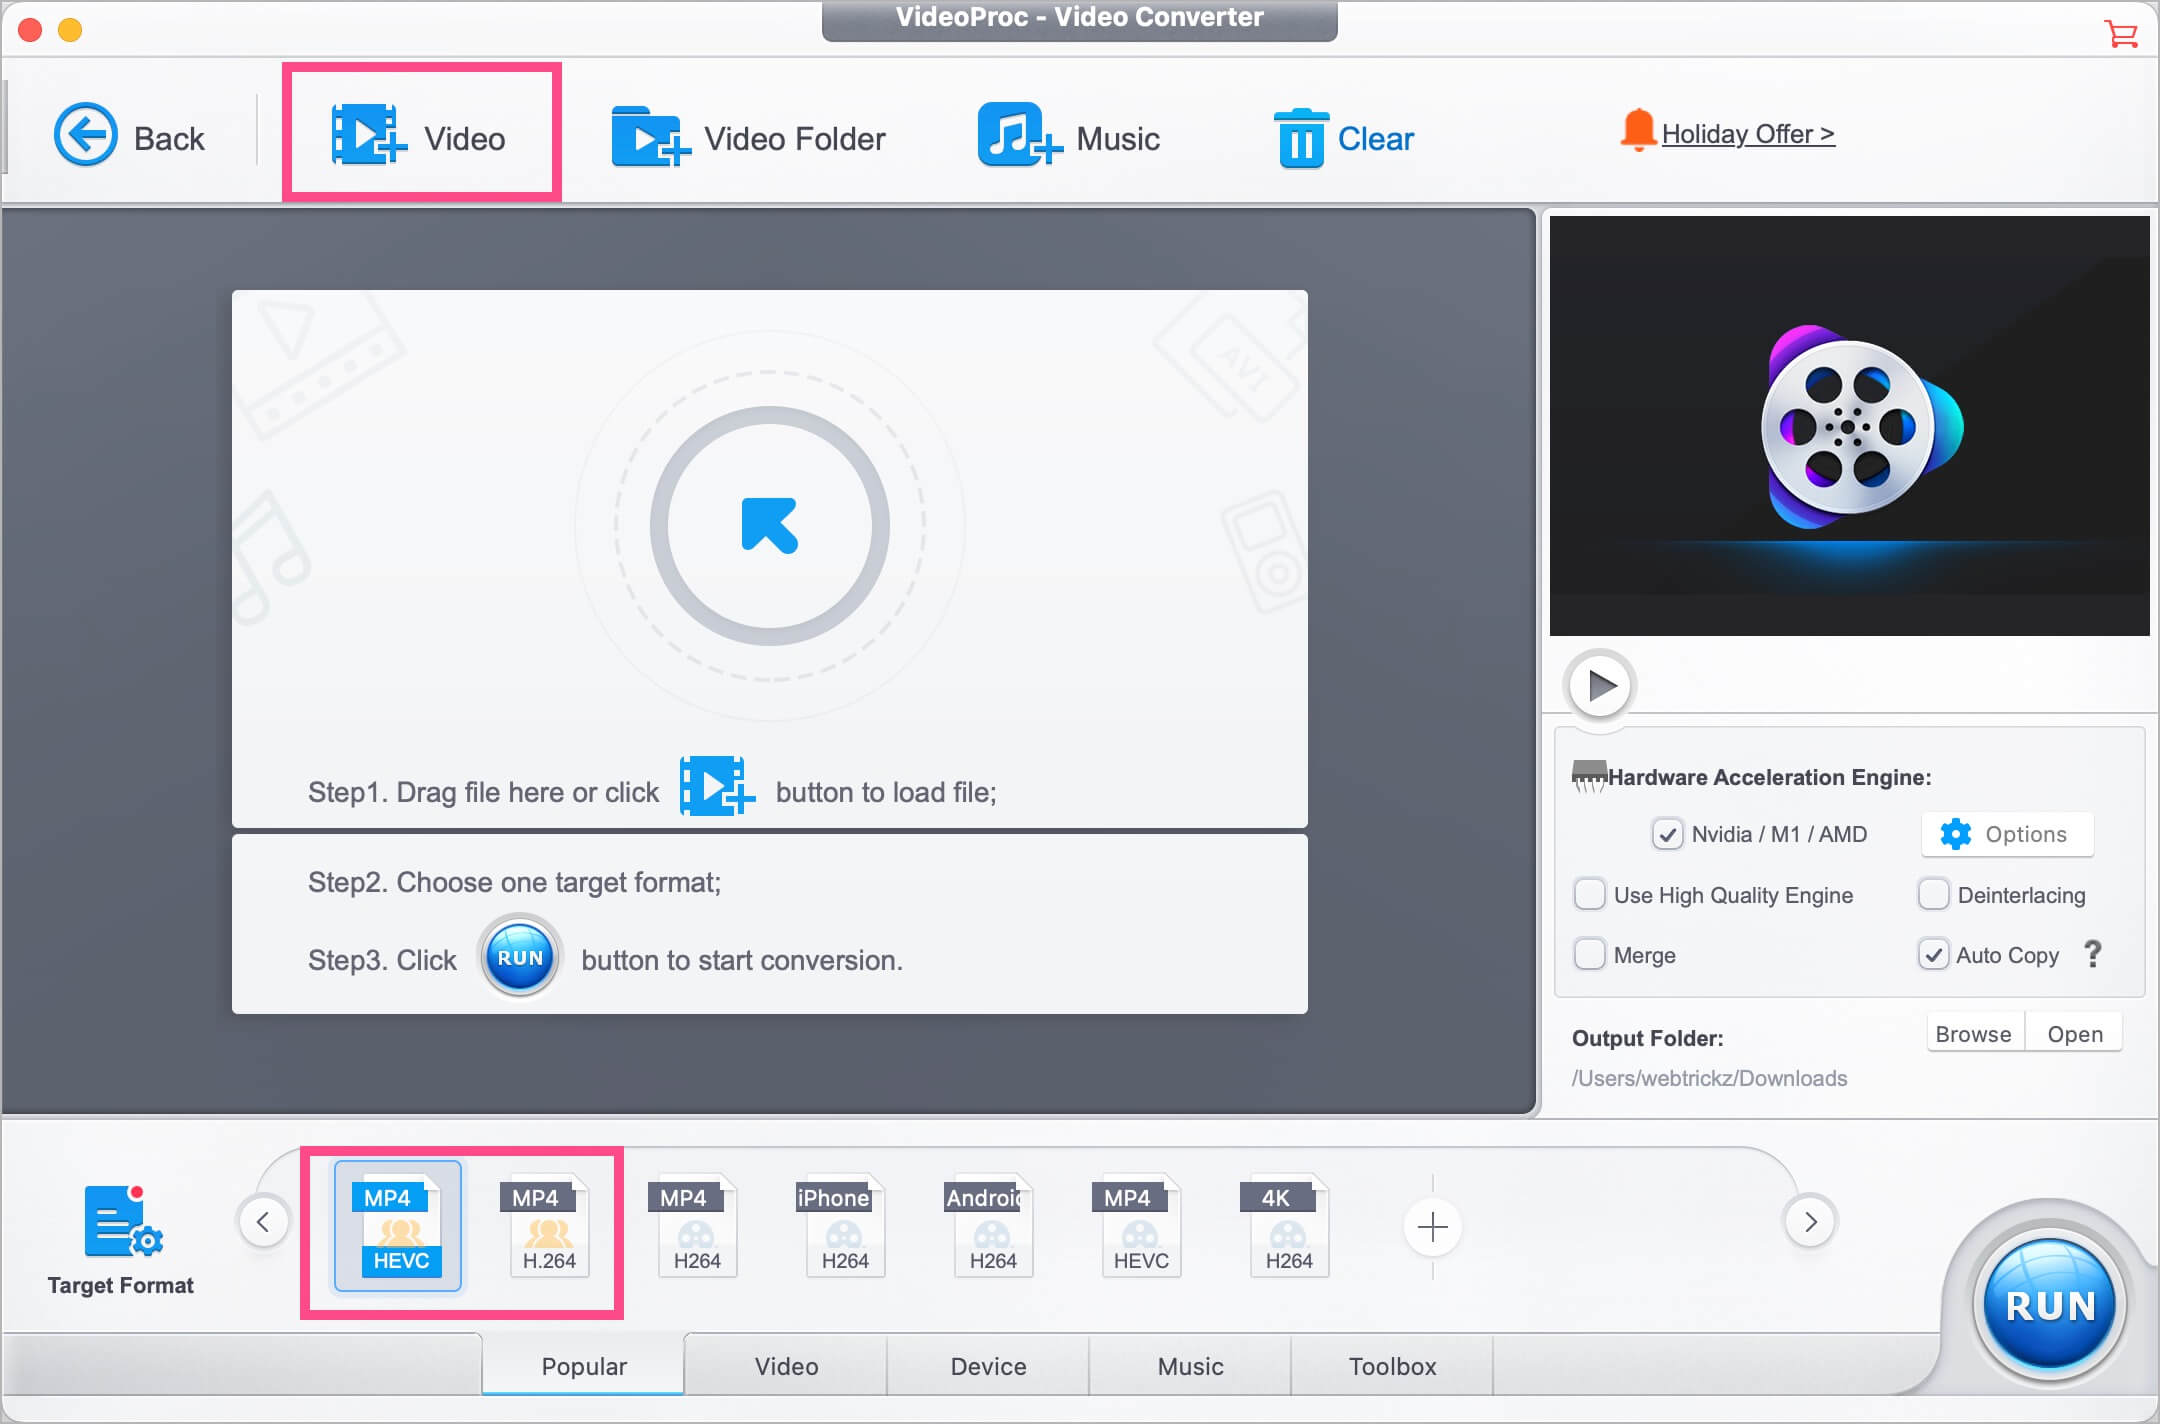 how to convert mkv videos to mp4 using Videoproc